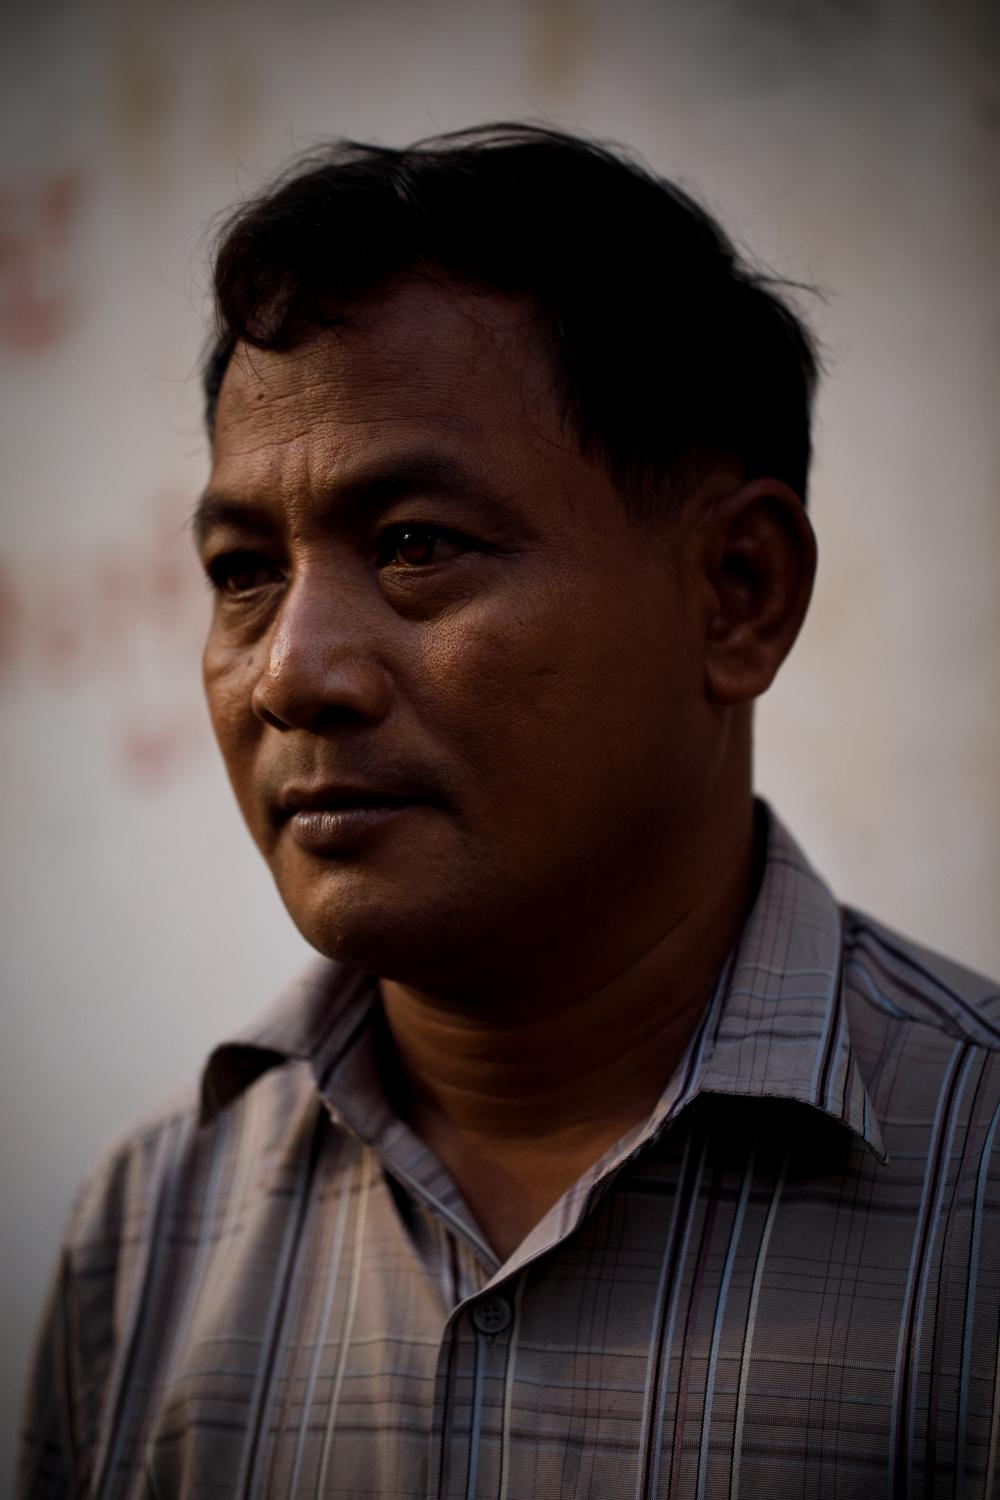  Norng Chan Phal was arrested with his mother and brother by the Khmer Rouge troops. They were...